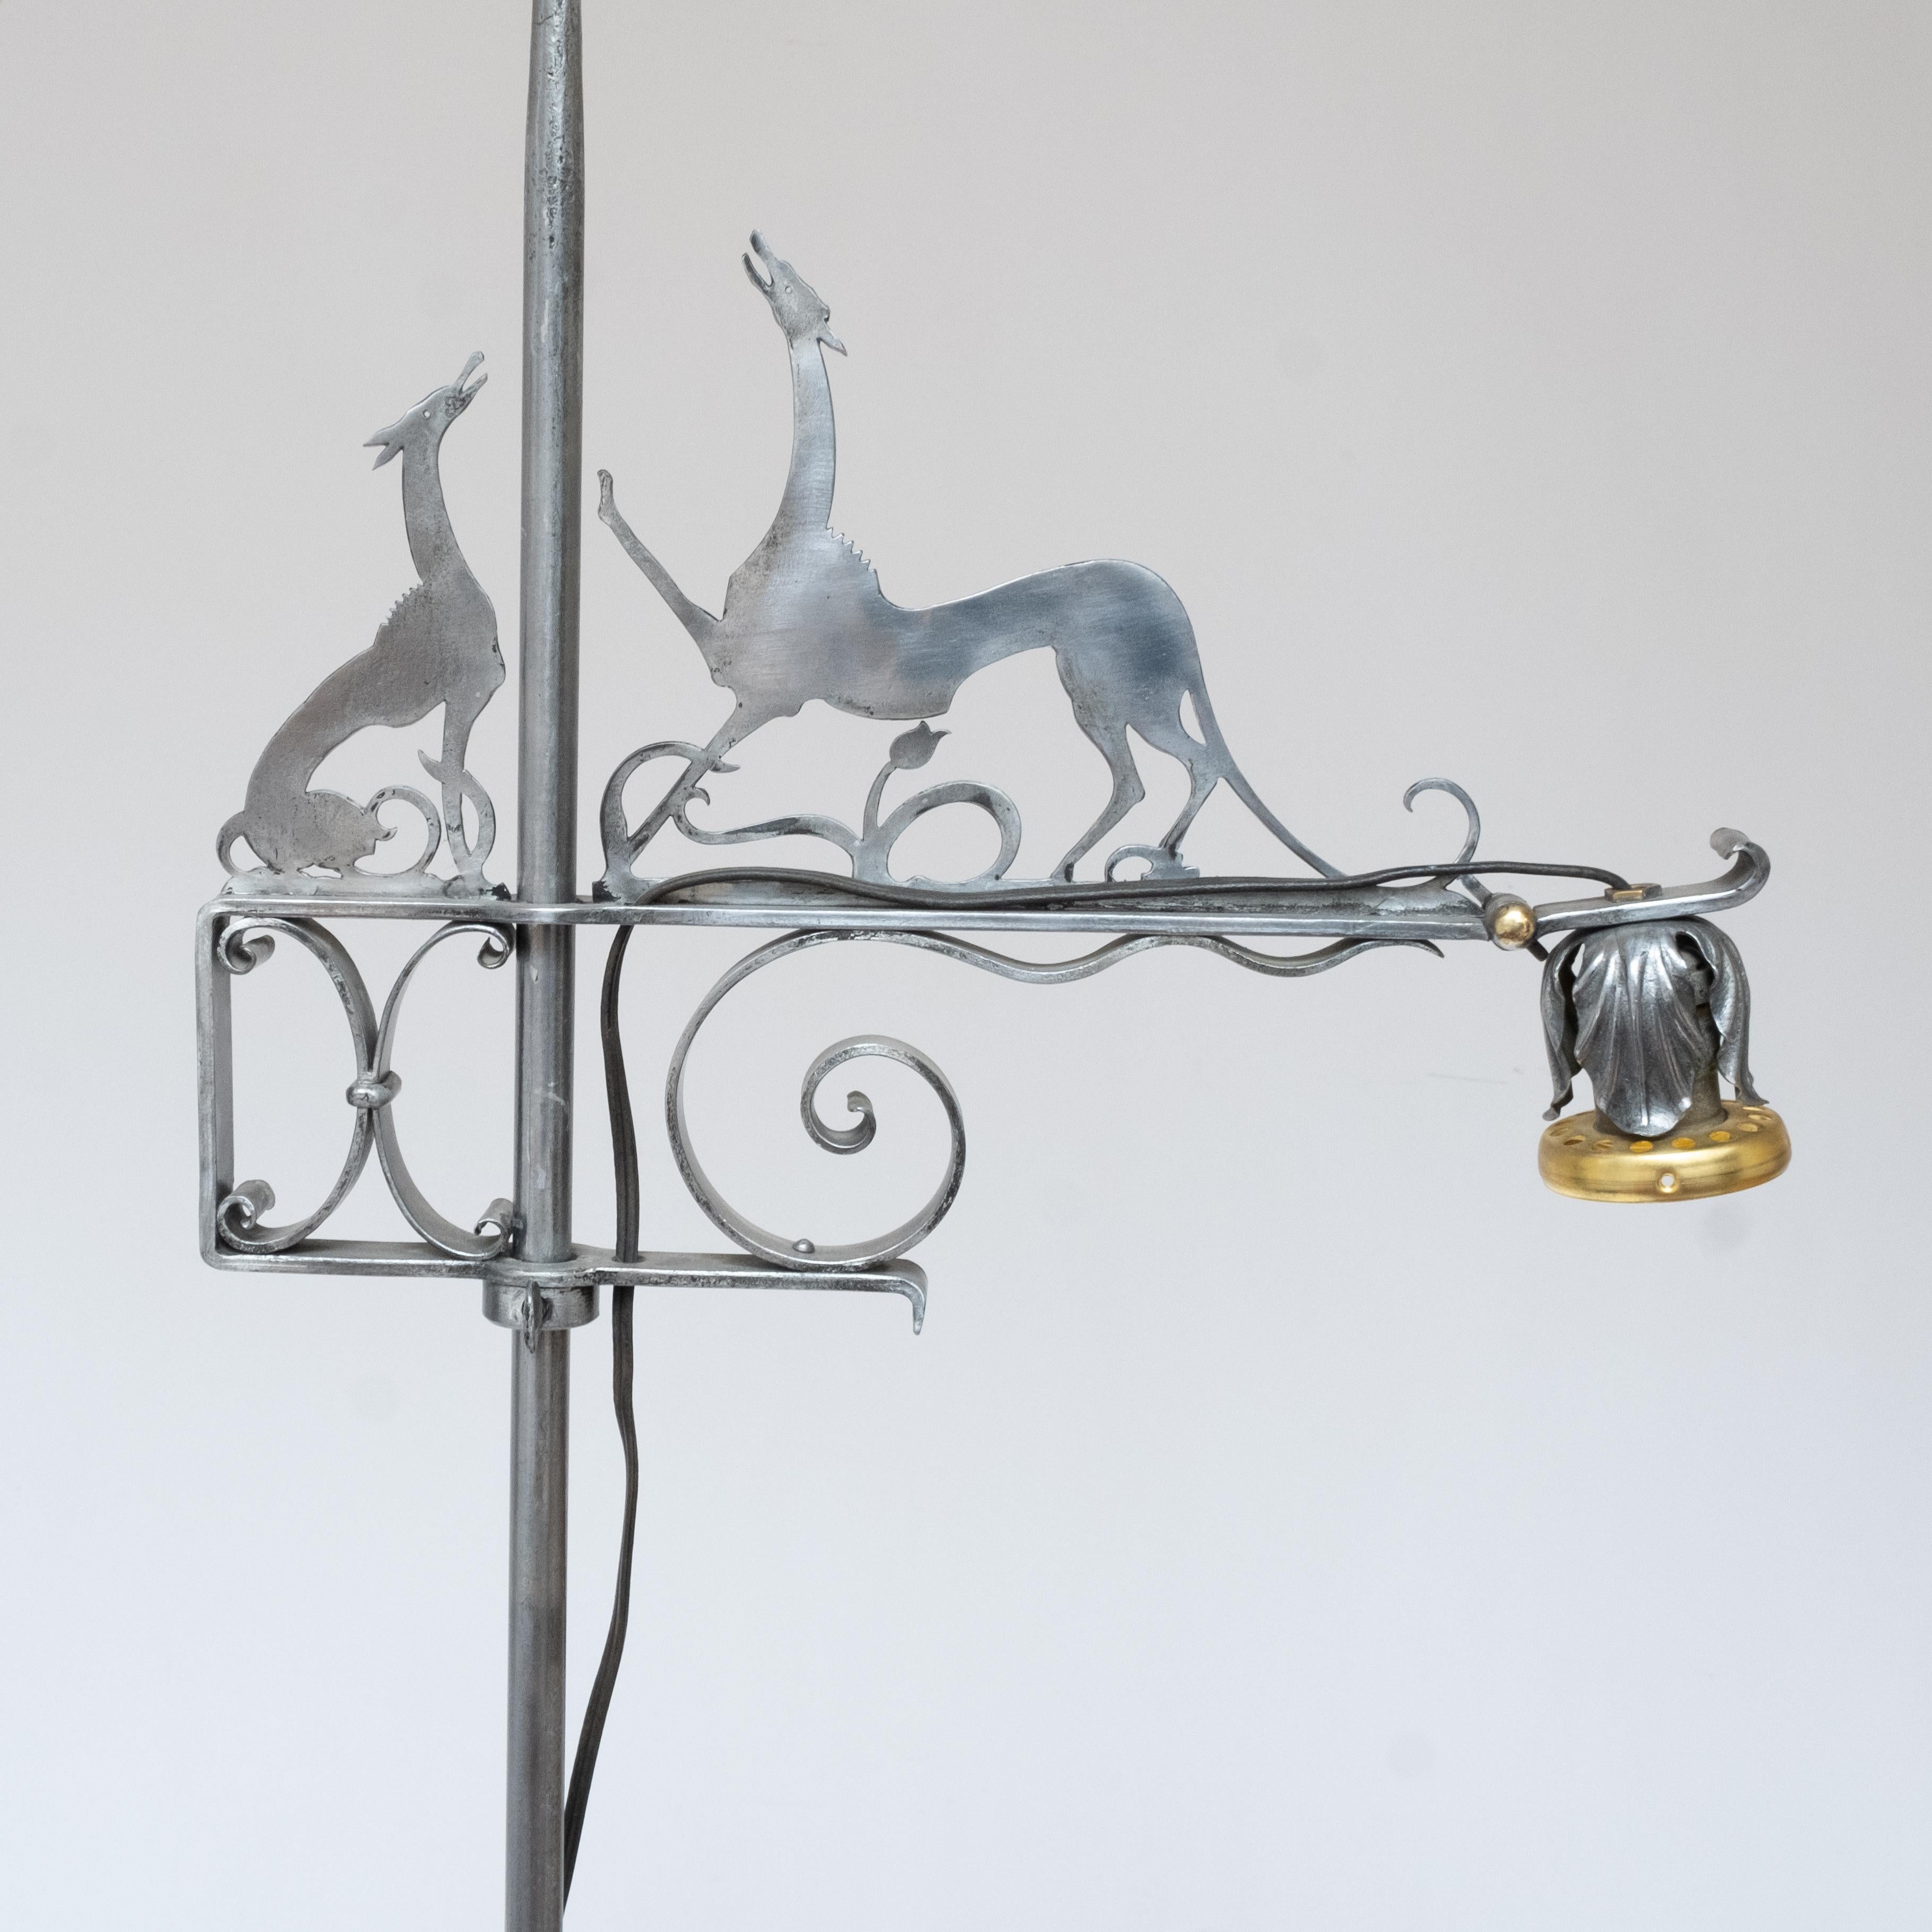 William Hunt Diederich Adjustable height Floor Reading Lamp adorned with Diederich's iconic greyhounds in silhouette formed of cut steel from the collection of noted collector and respected gallery owner, Kenneth Dukoff  of Niagara Falls,